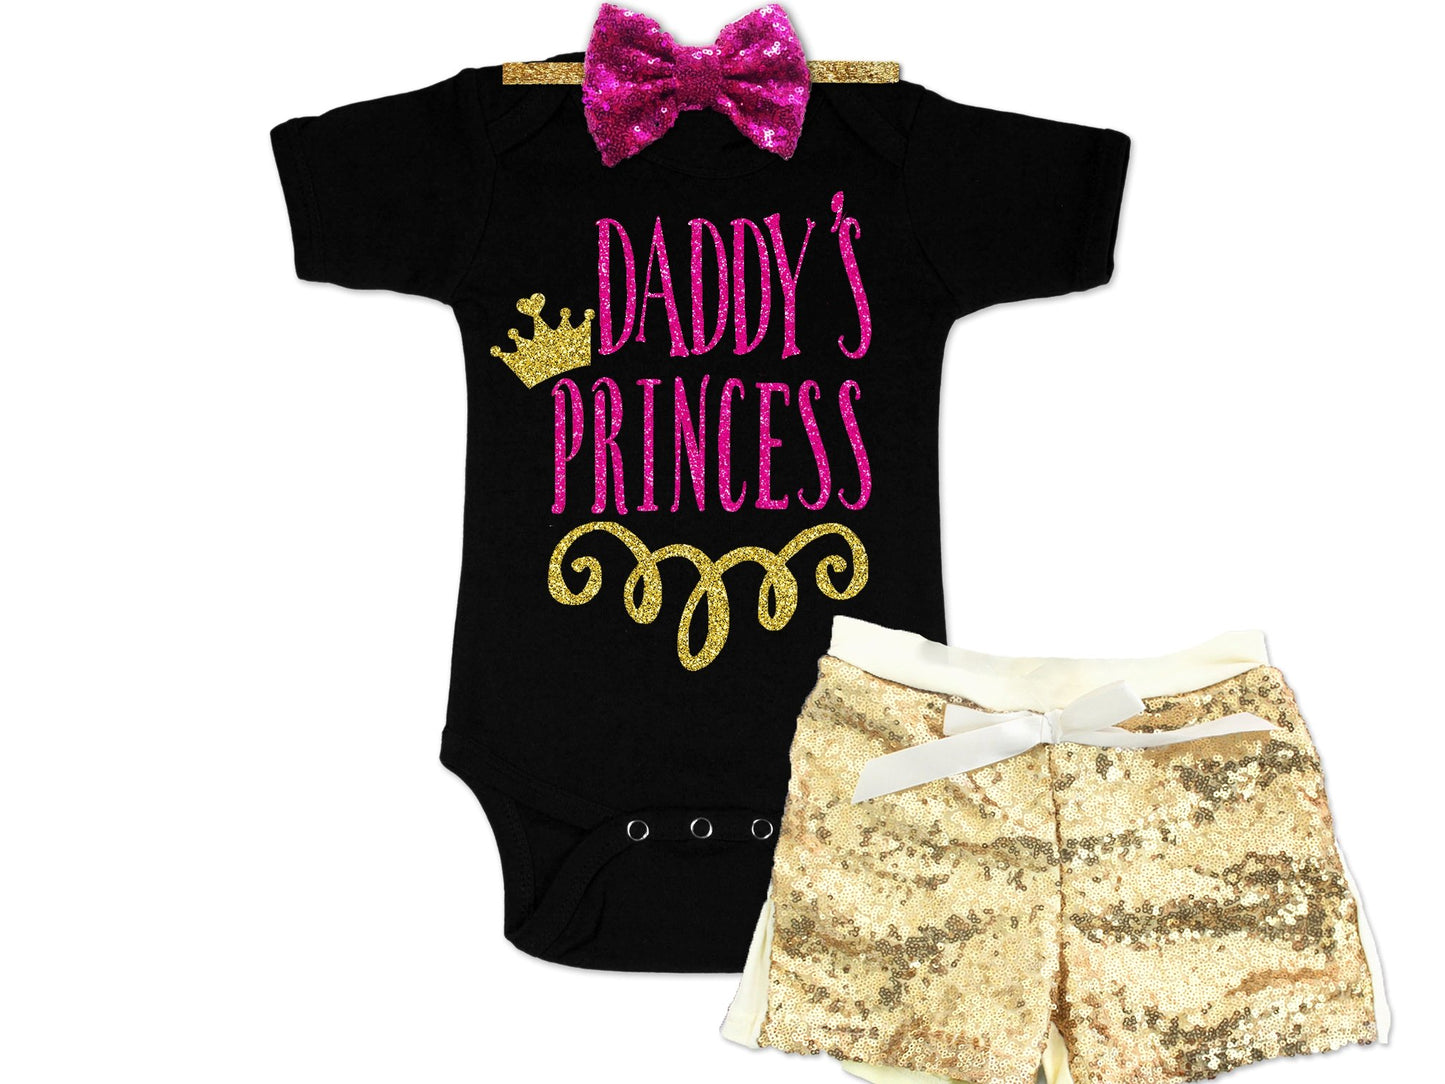 Girl's Daddy's Princess Outfit - Squishy Cheeks